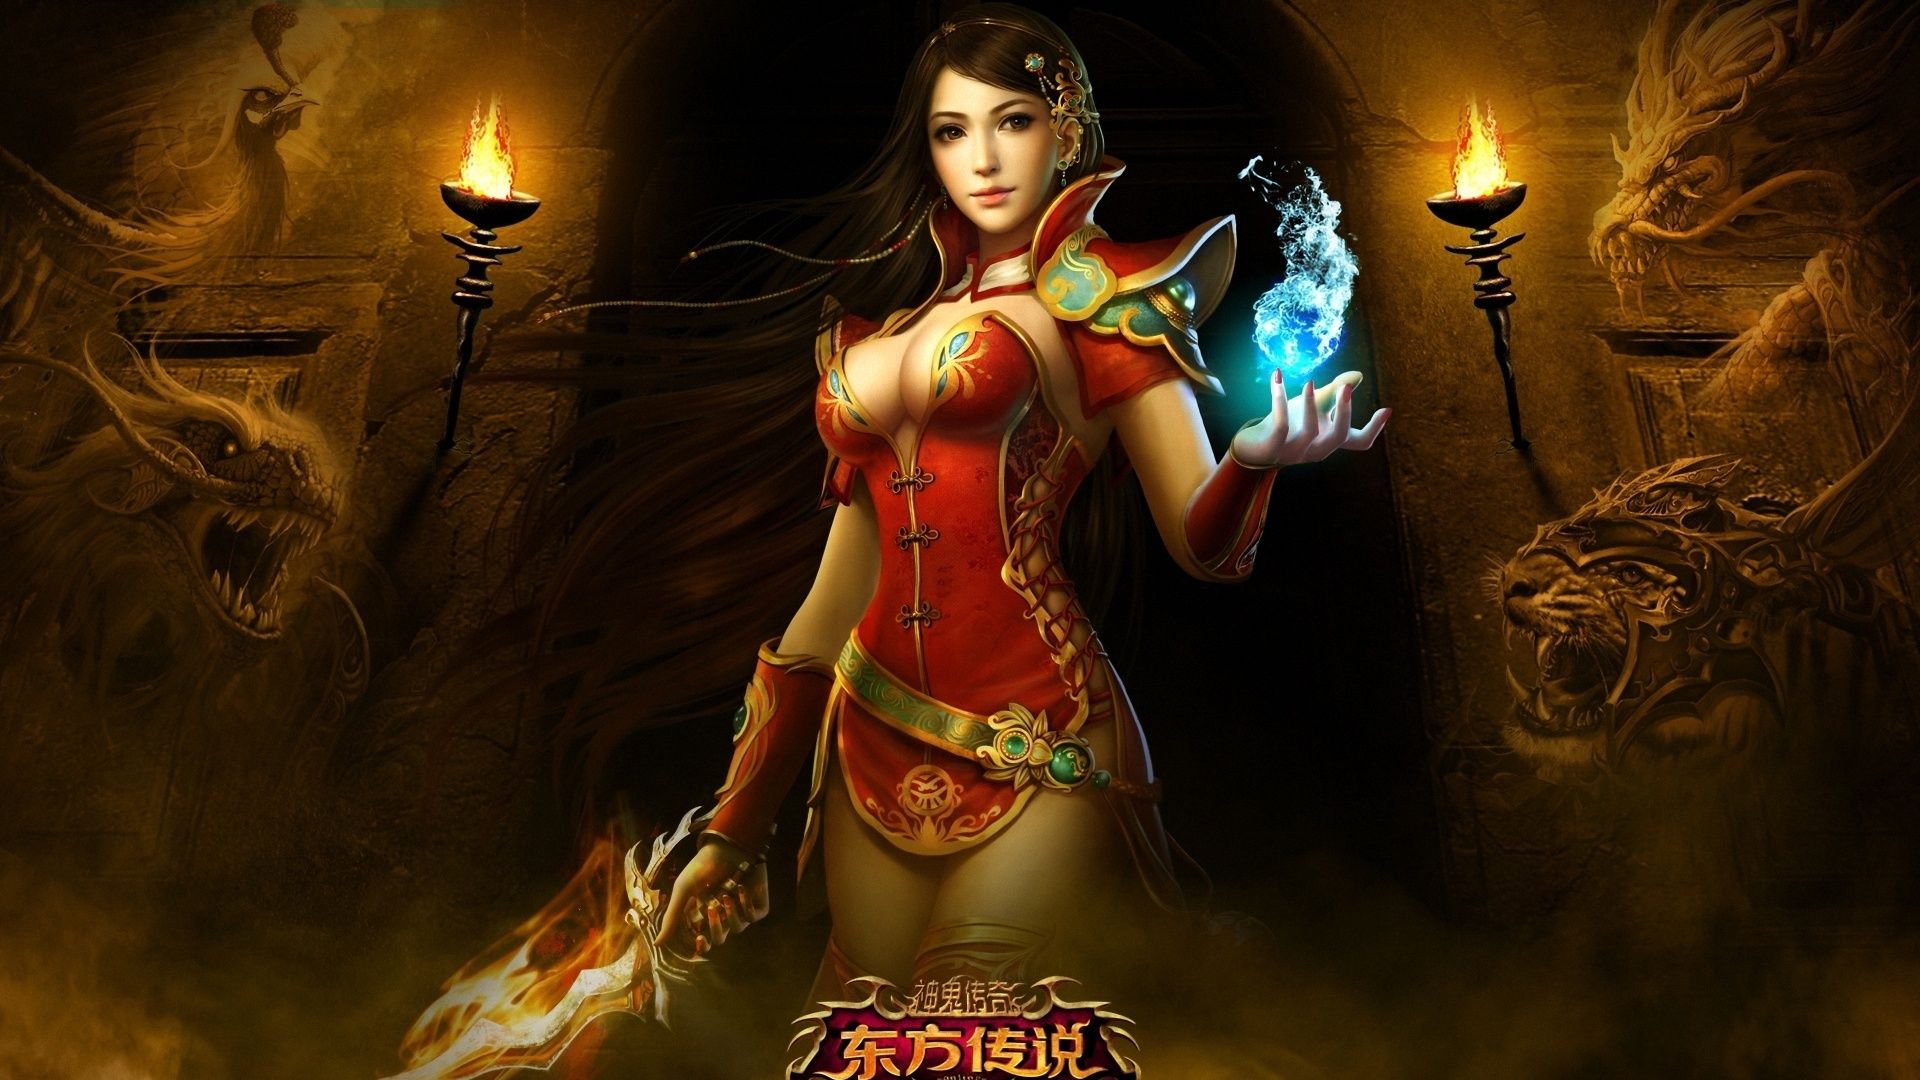 Wallpaper Oriental legend of the game beautiful girl 1920x1200 HD Picture, Image